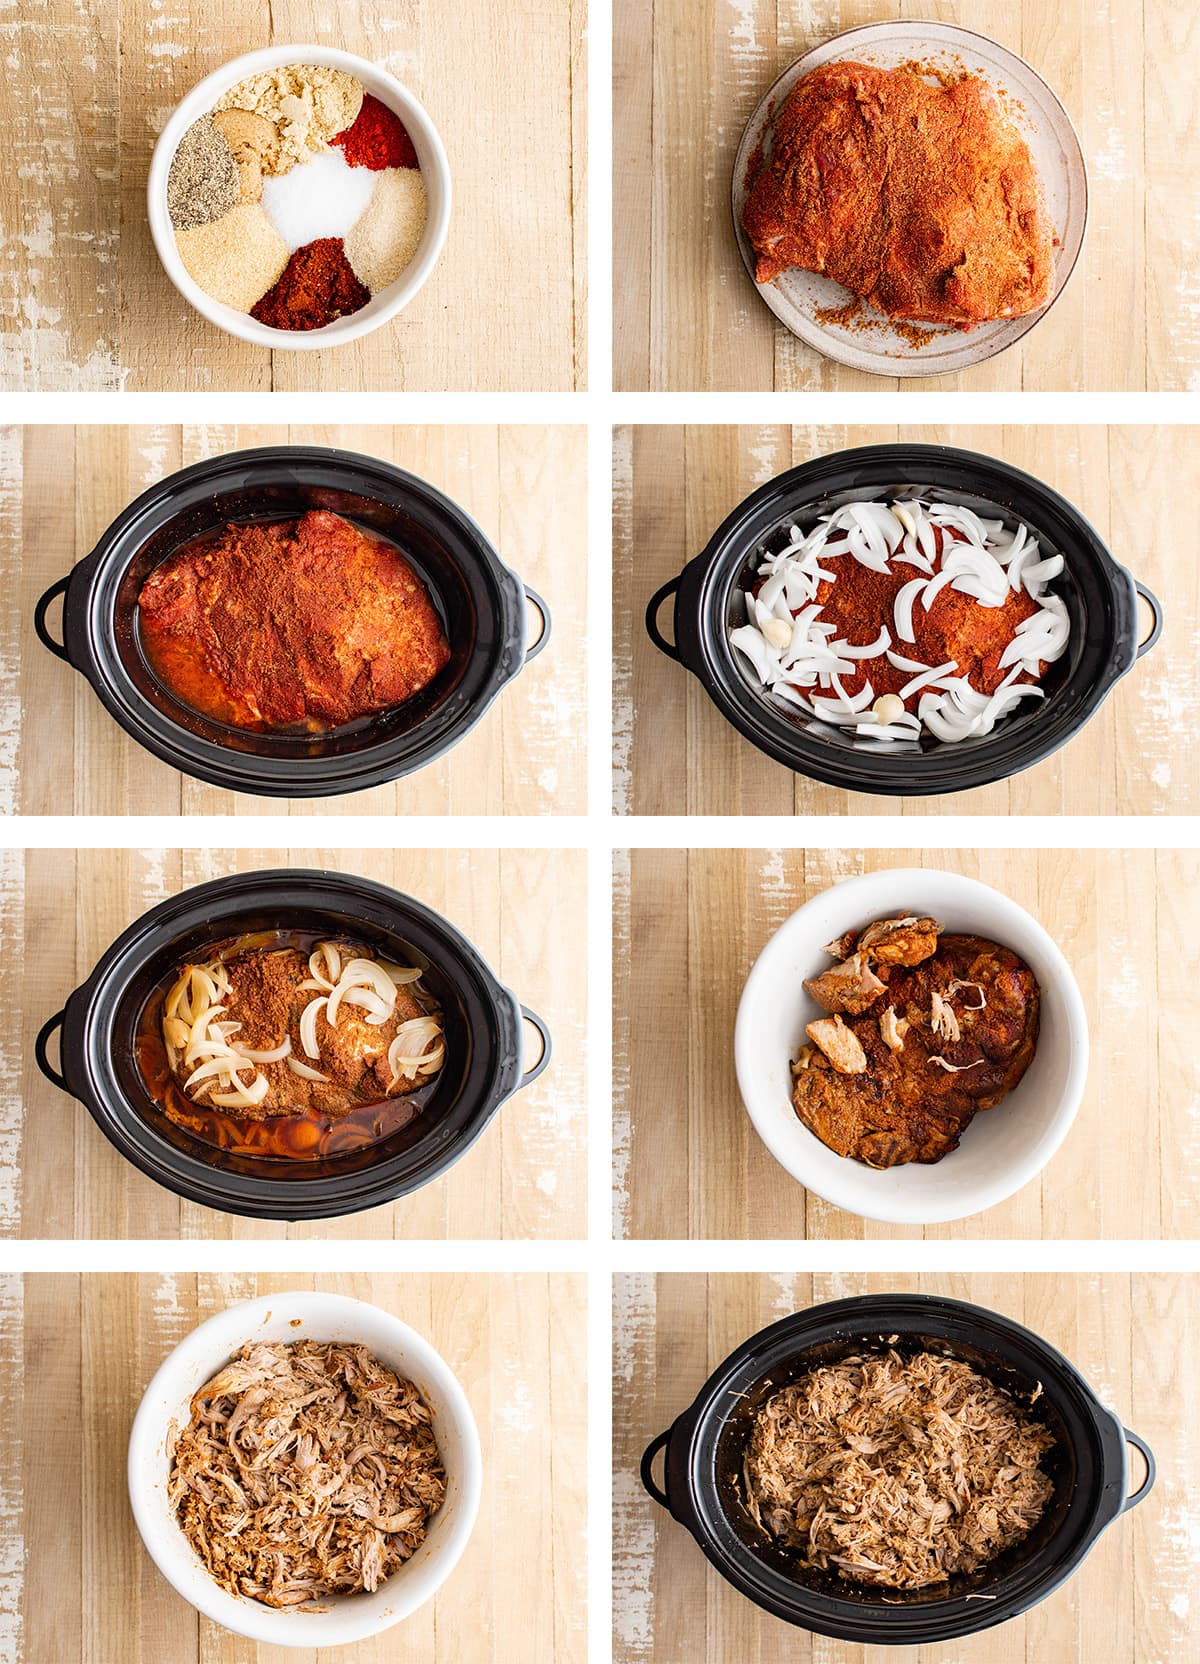 Collage of images showing how to make pulled pork.